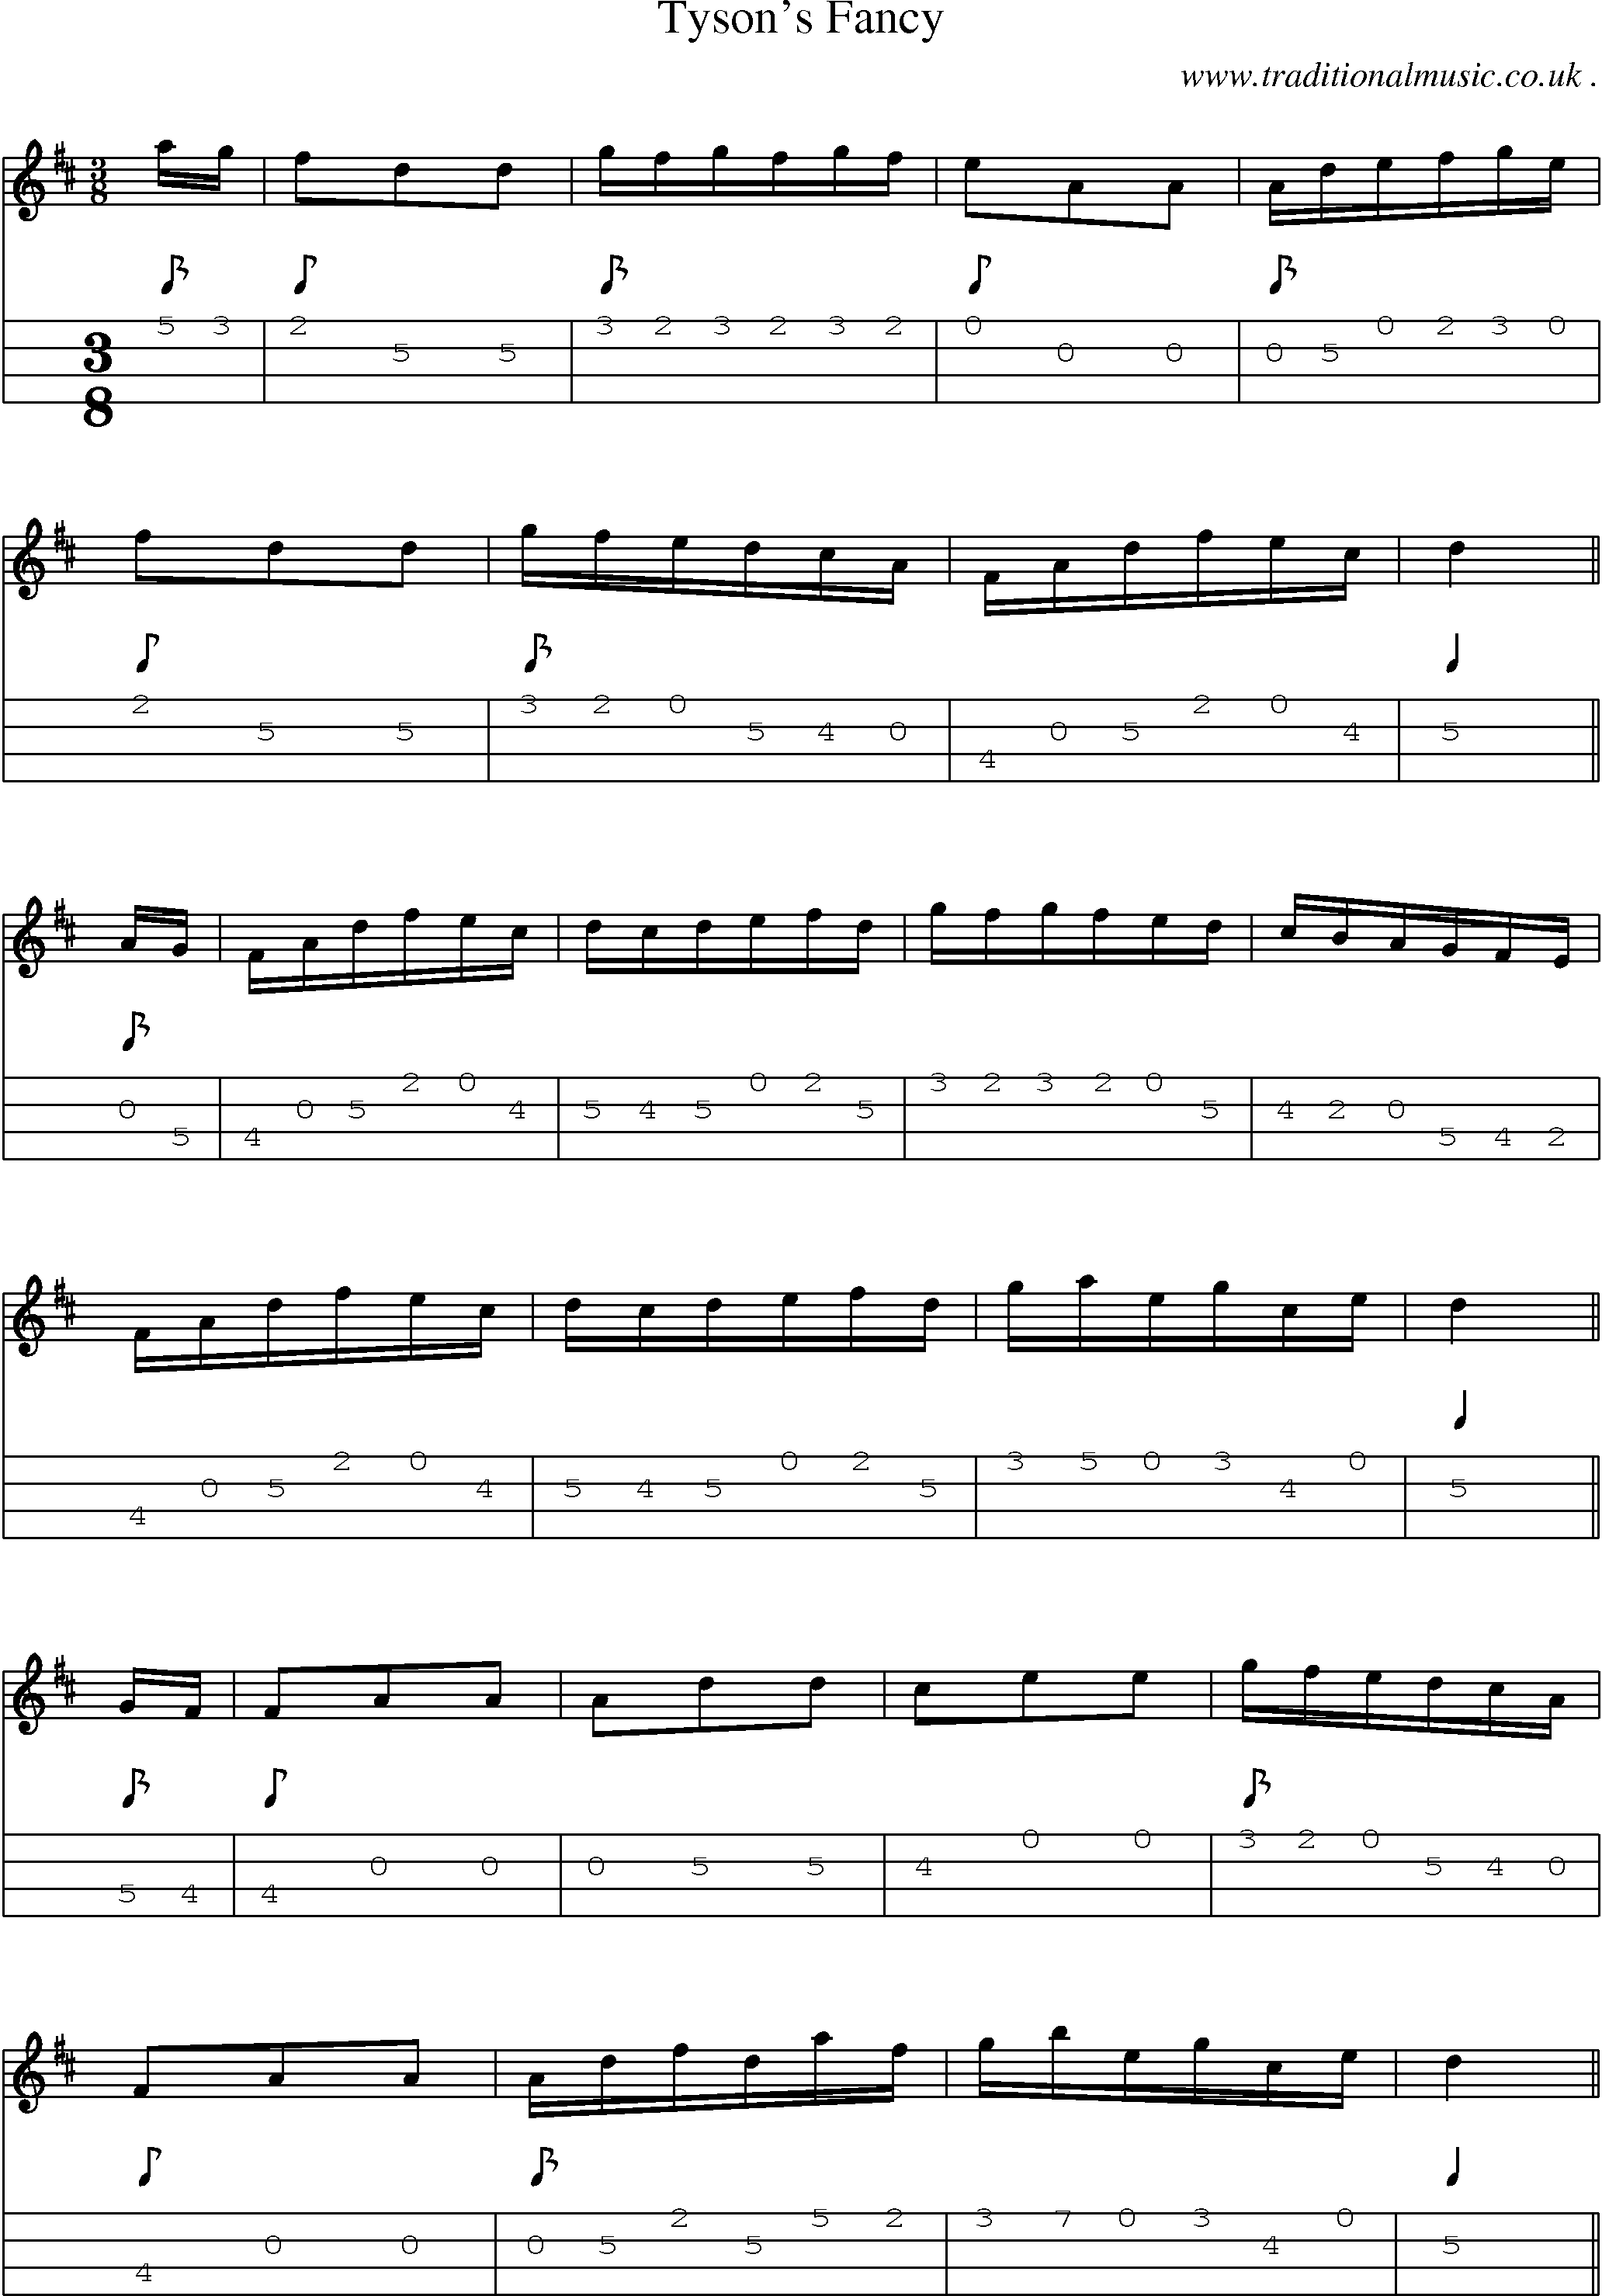 Sheet-Music and Mandolin Tabs for Tysons Fancy